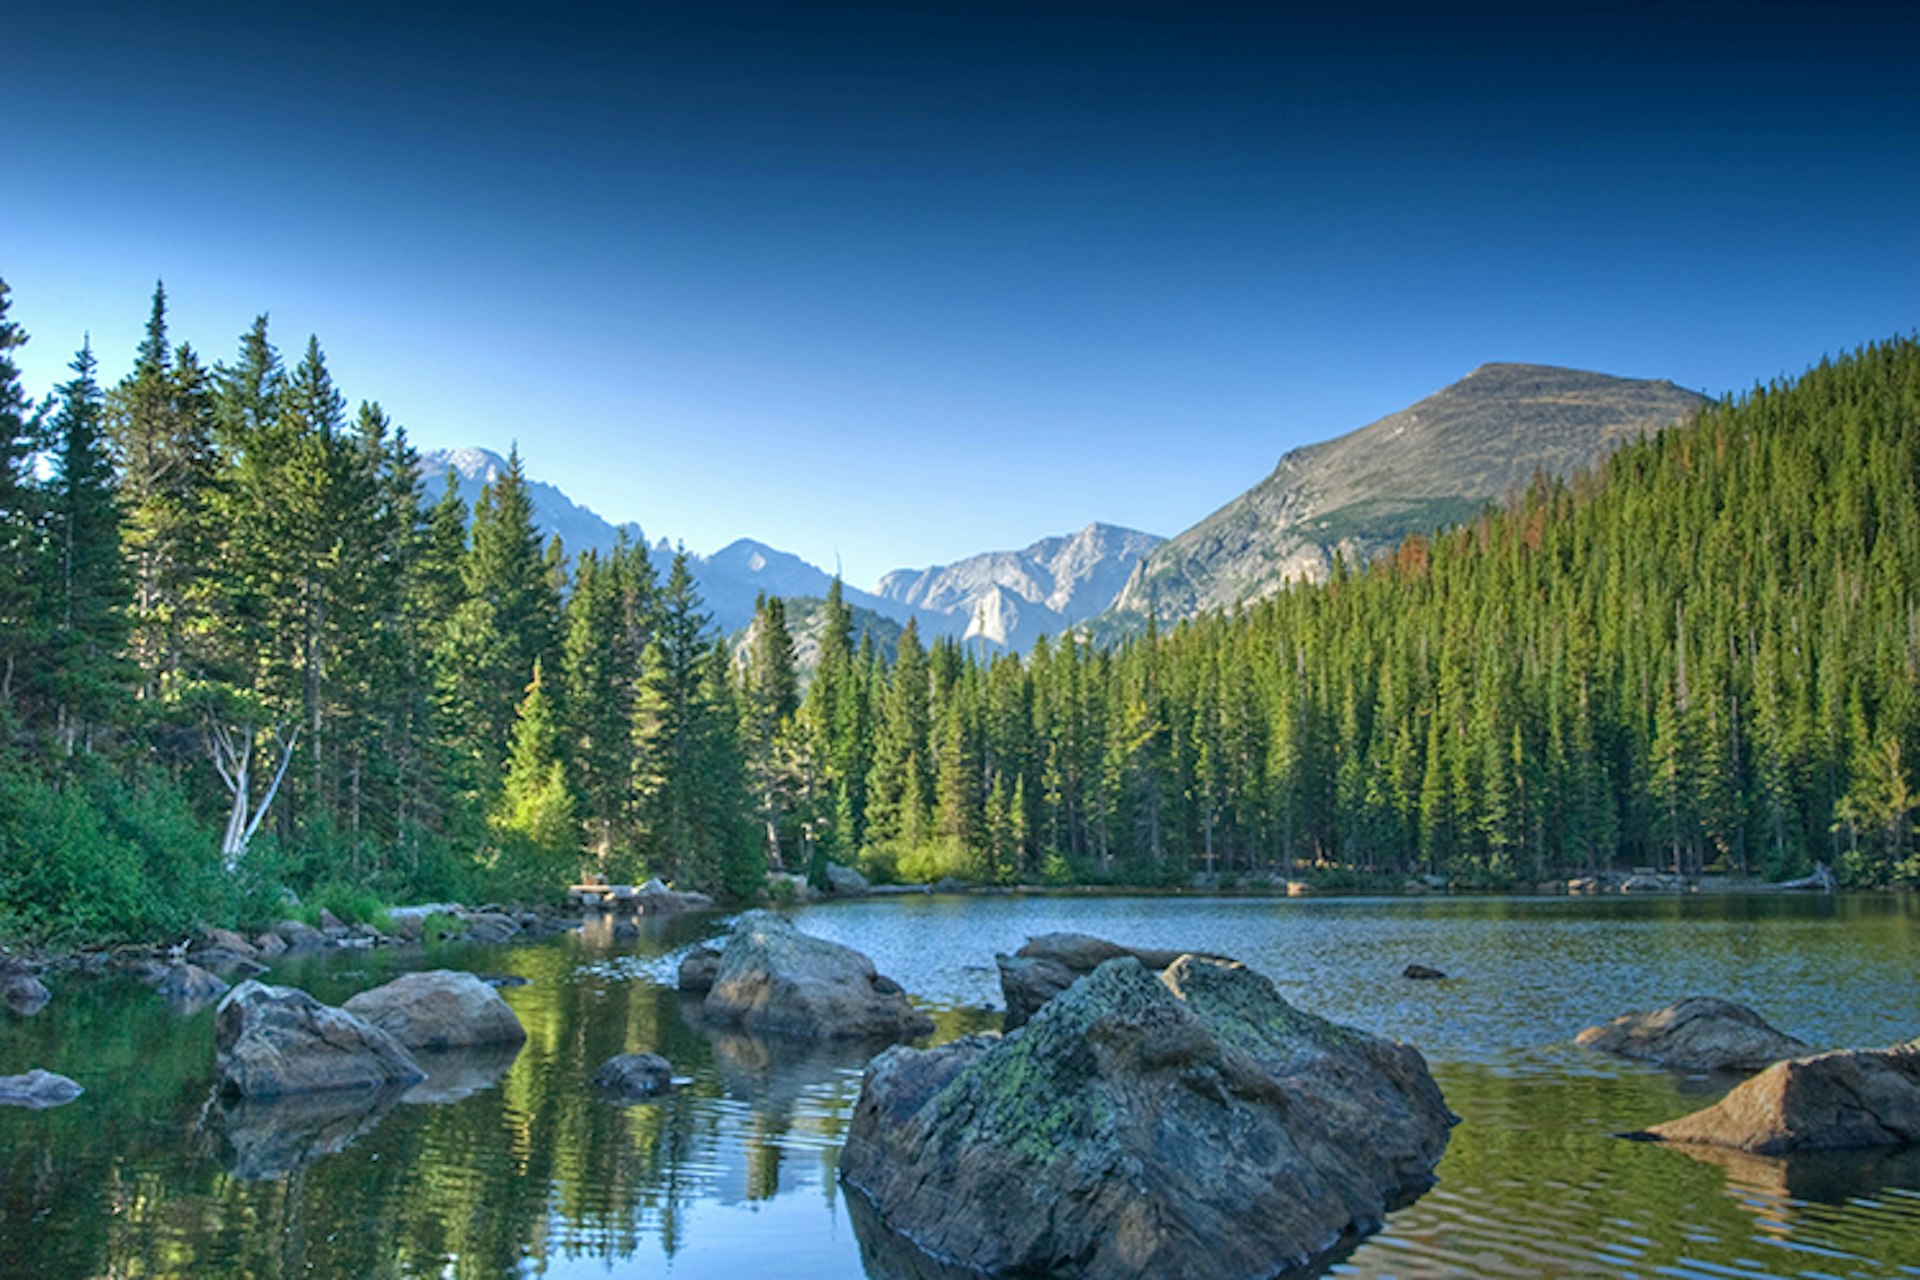 View of Bear Lake in Rocky Mountain National Park. Image by Wayne Boland / Getty